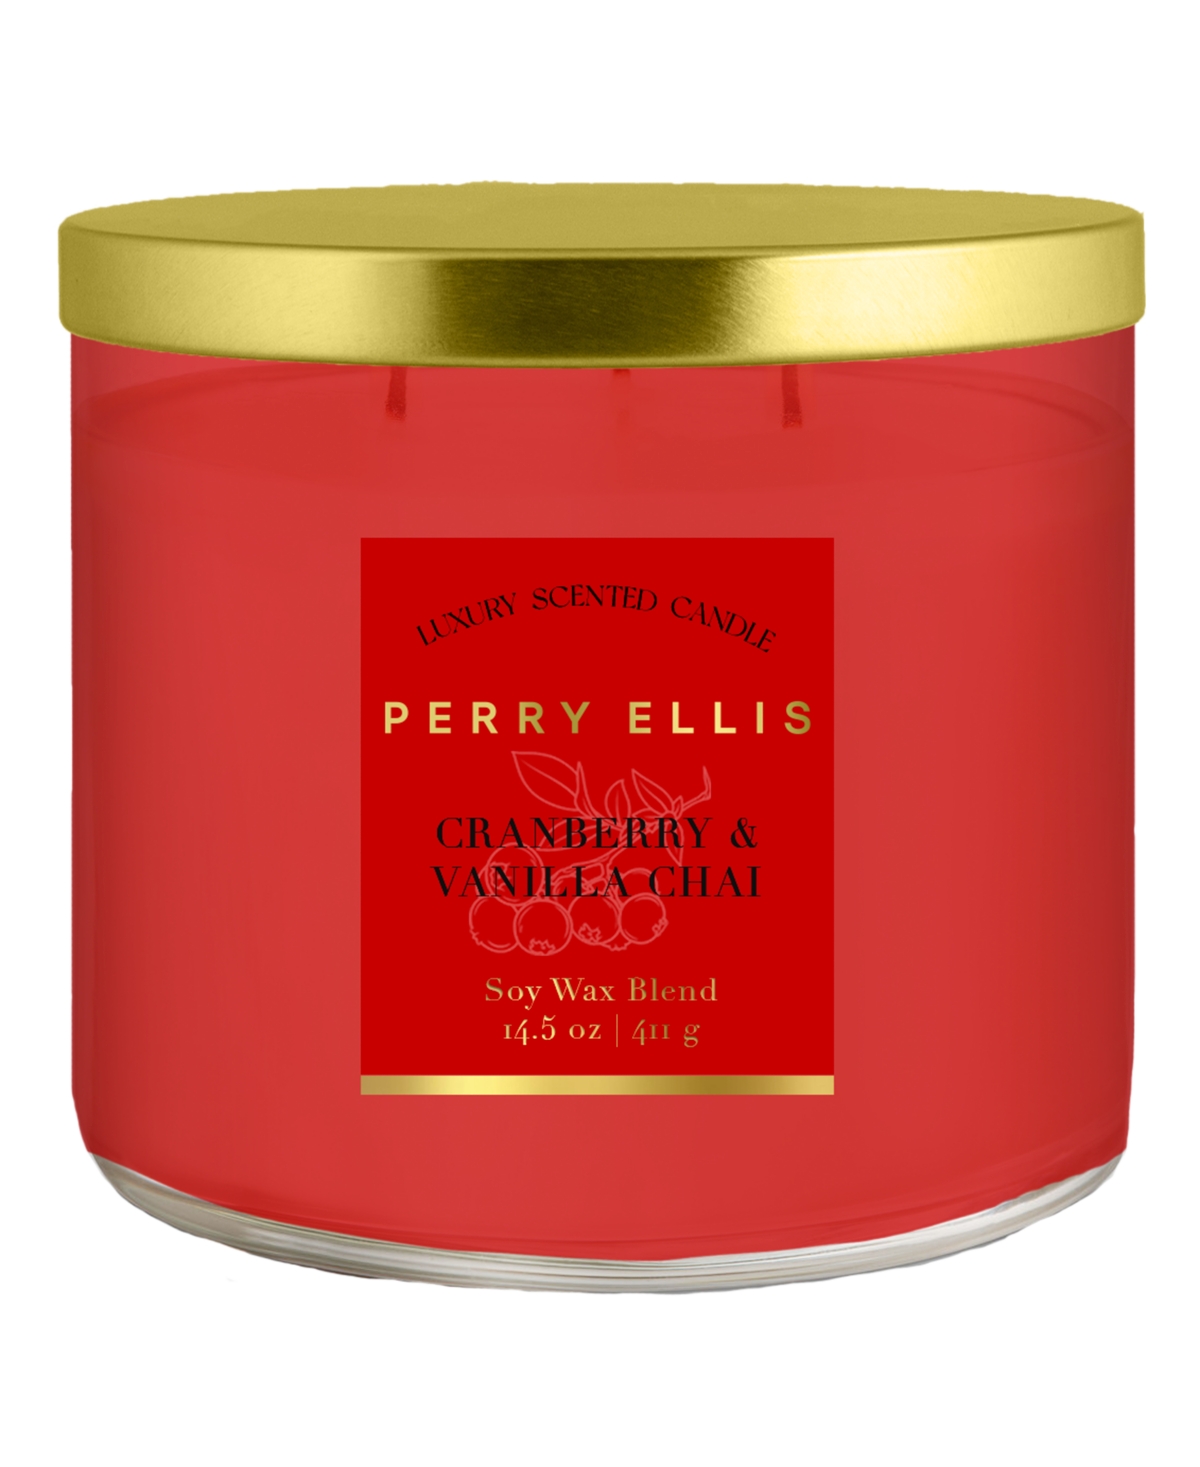 Perry Ellis Cranberry And Vanilla Chai Candle, 14.5 oz